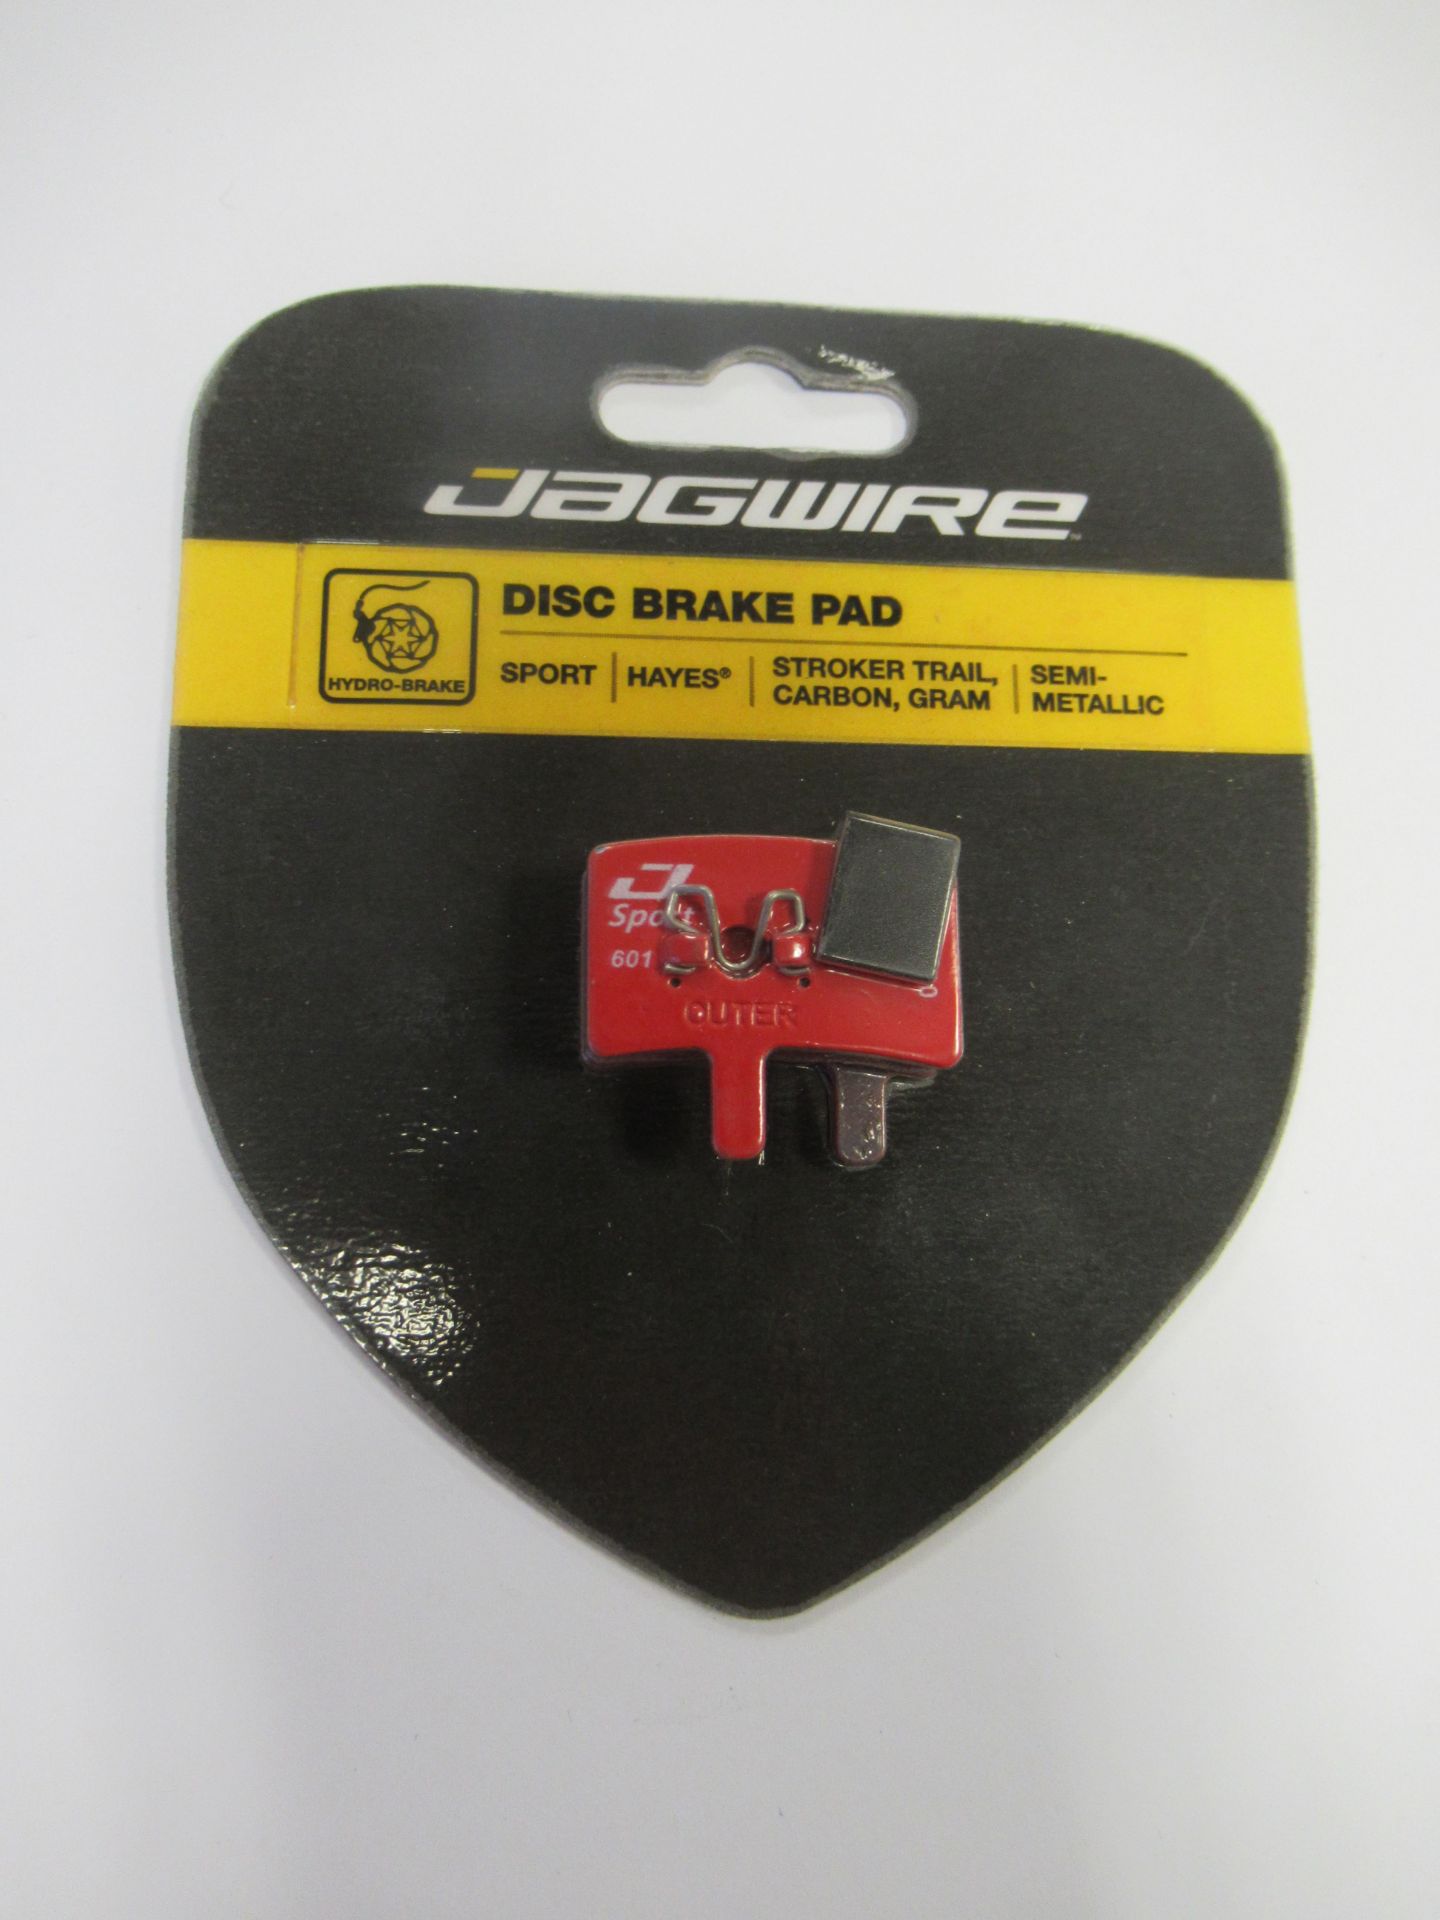 Jagwire Disc Brake Pads to include 4x Sport, Hayes, Stroker Ryde, Semi-Metallic (DCA076), RRP £11 ea - Image 6 of 6